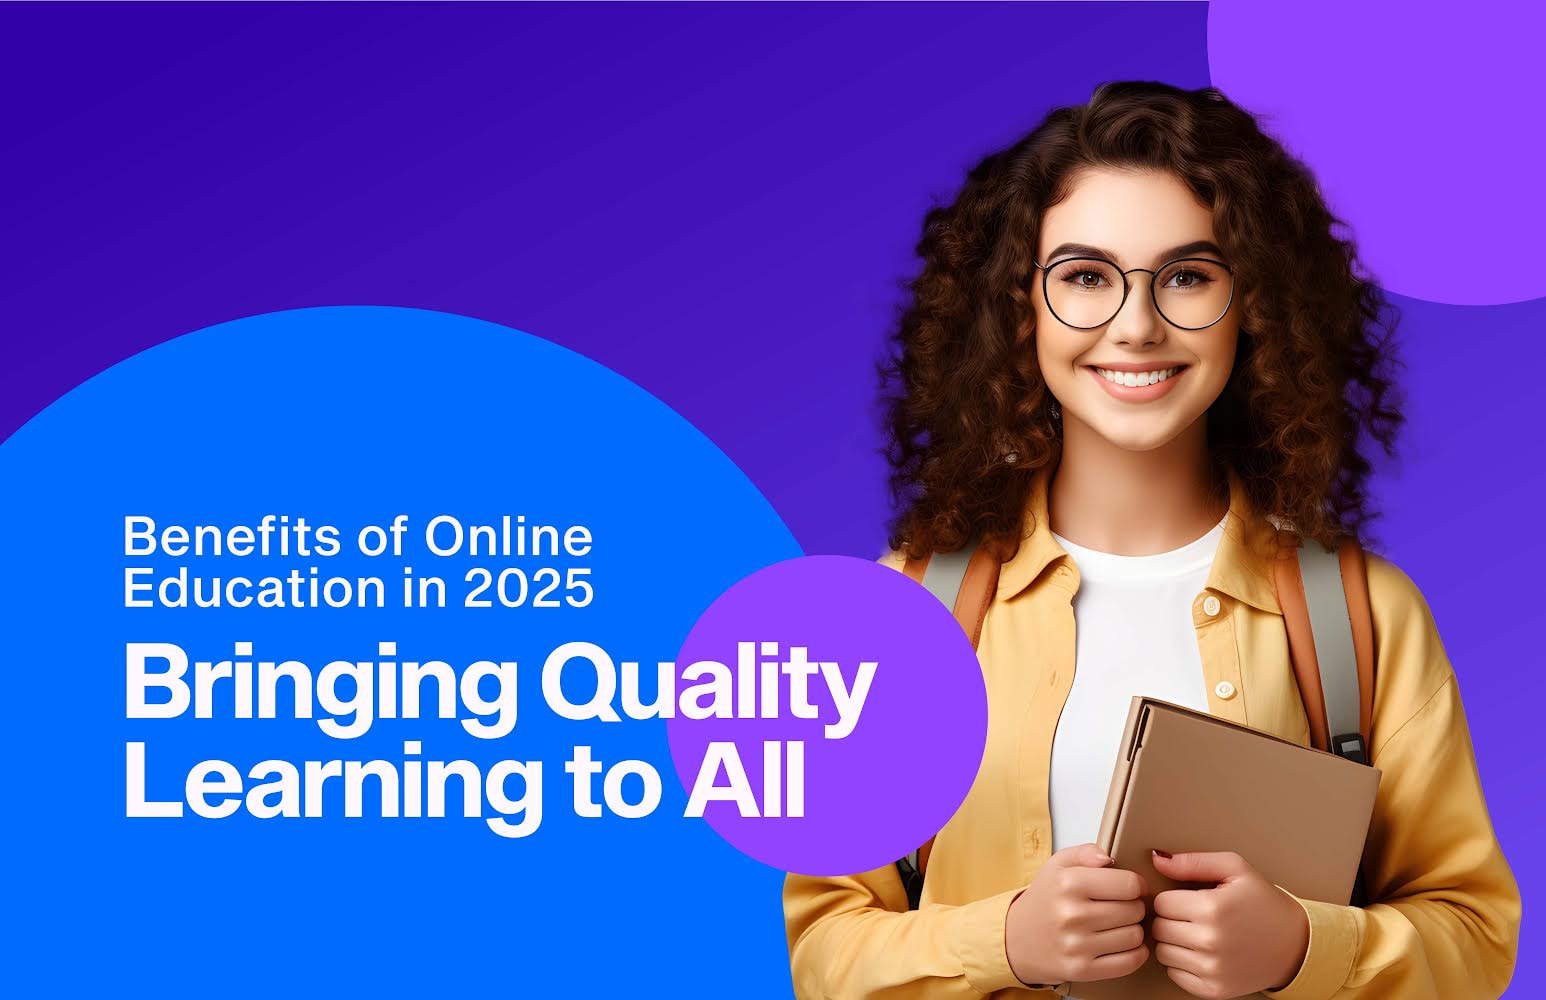 Benefits of Online Education in 2025: Bringing Quality Learning to All